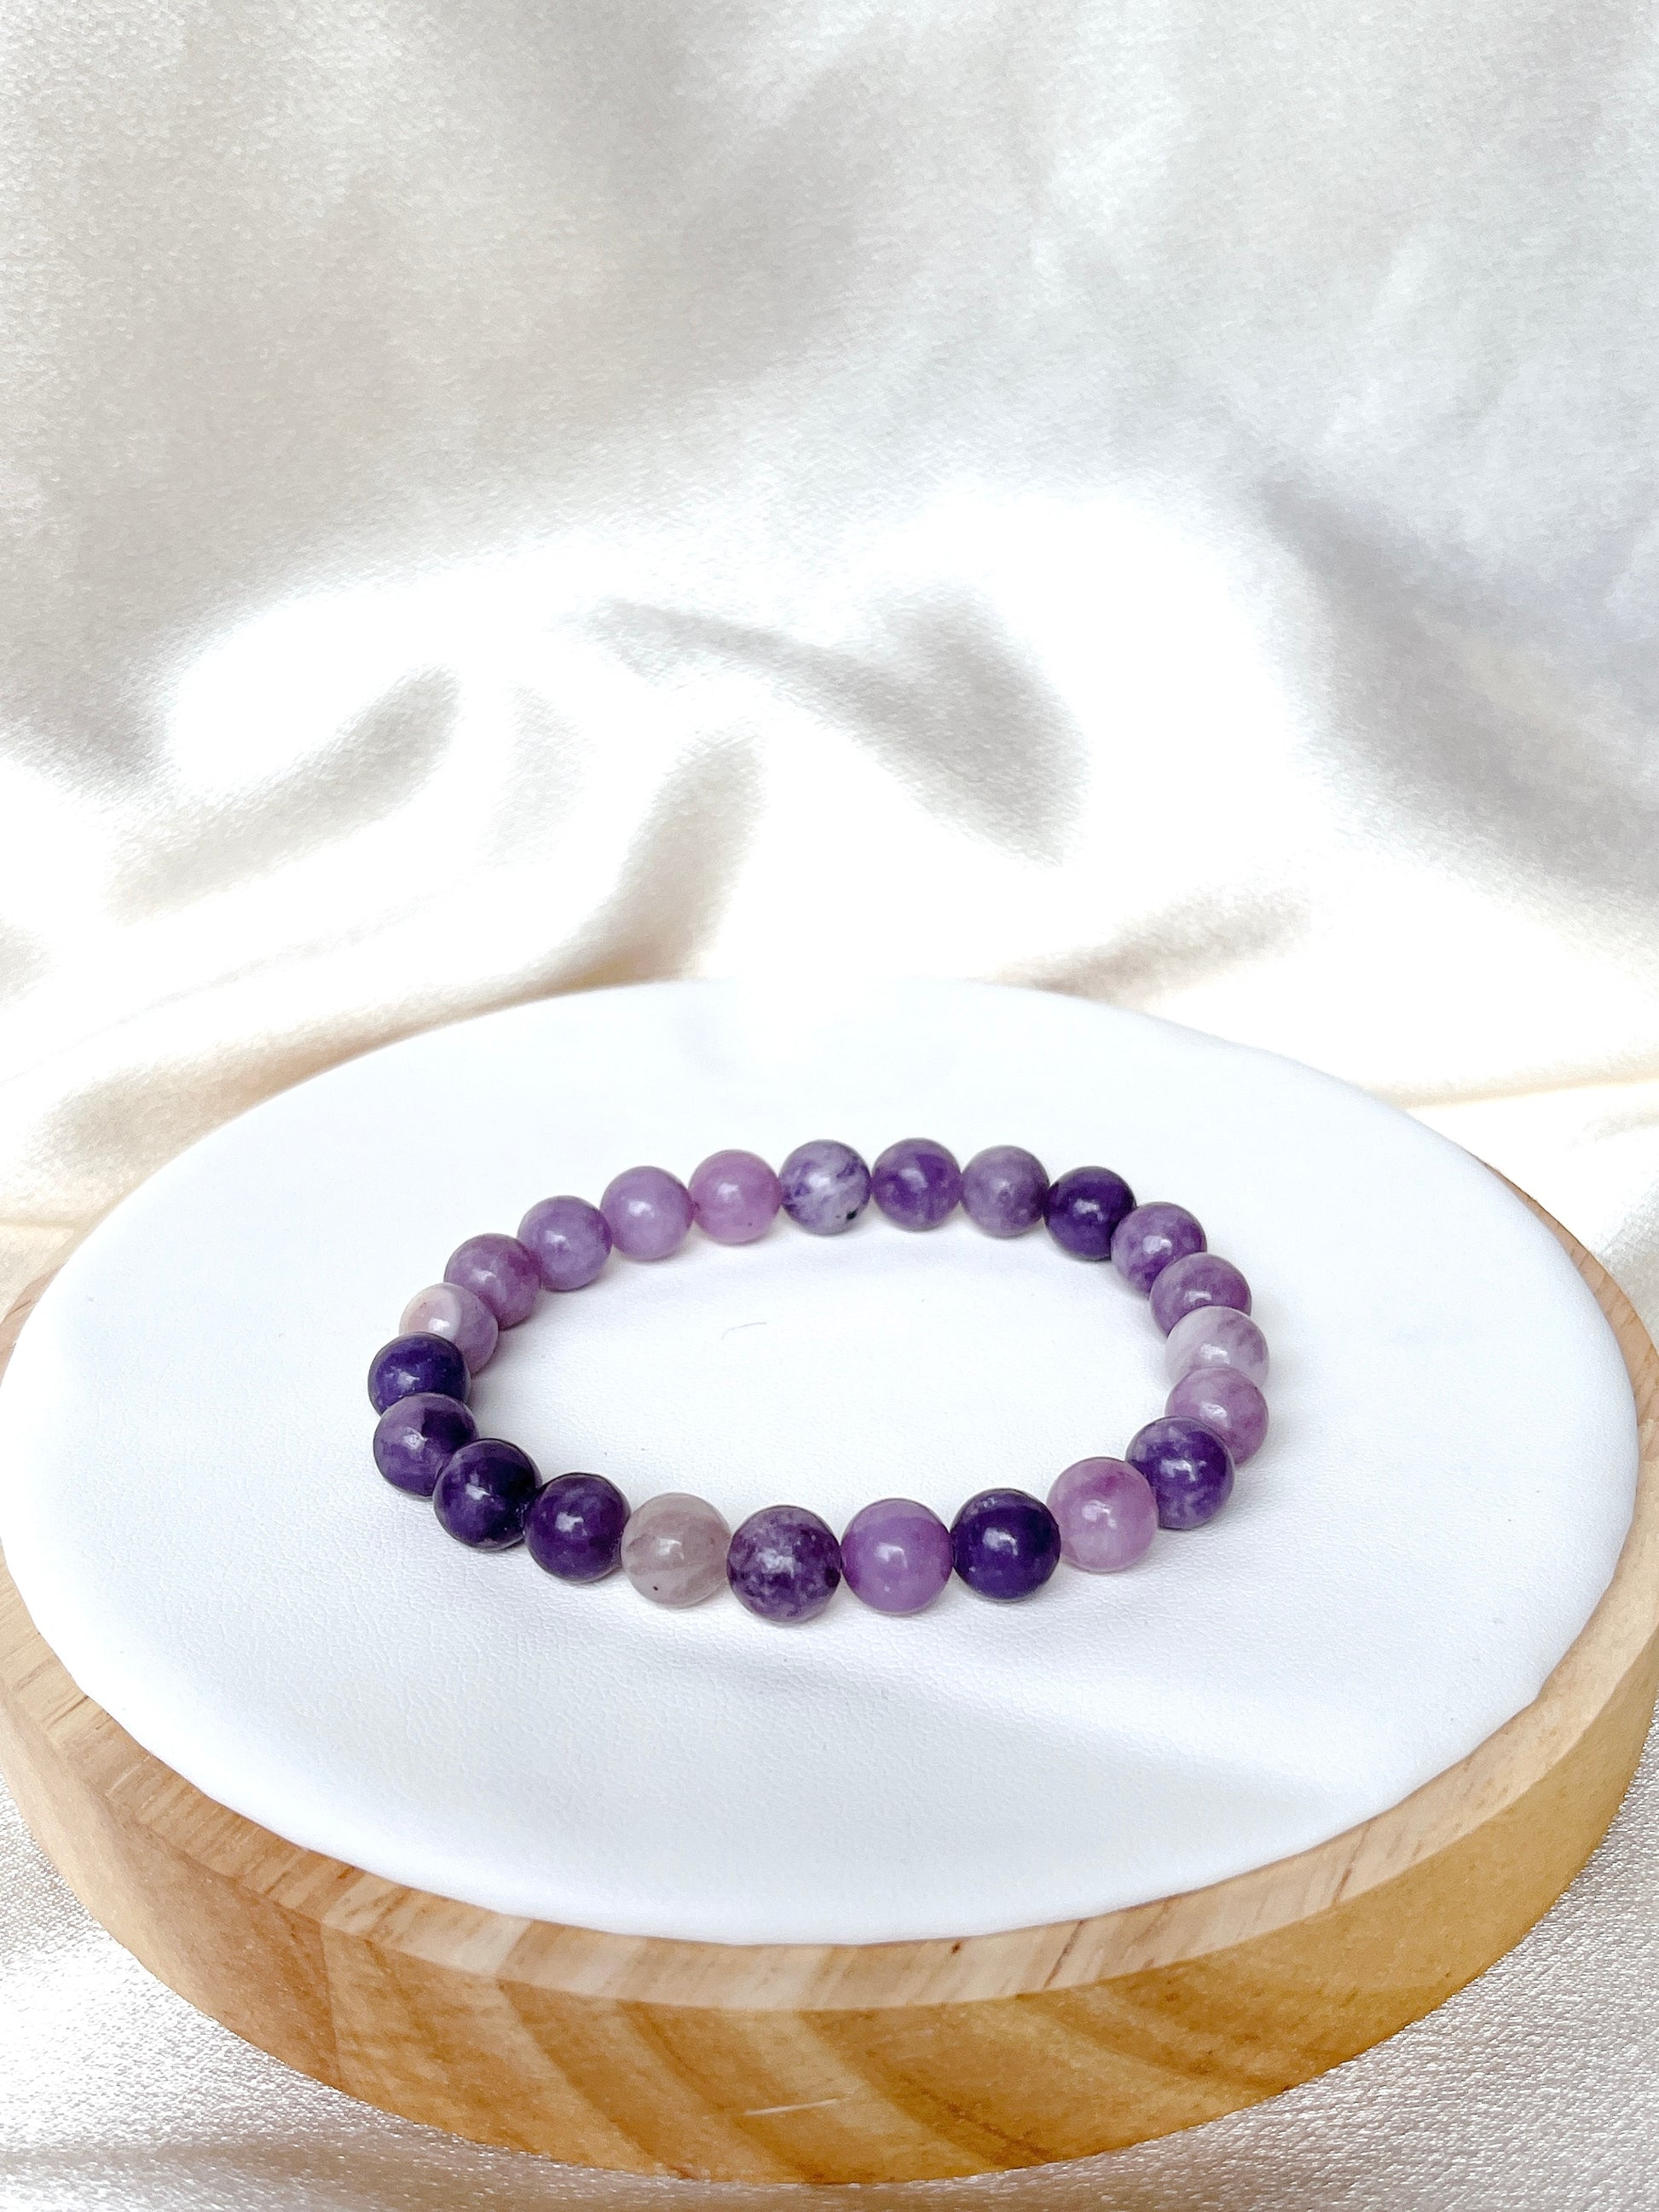 SPARKLD Gold Plated Silver Round Amethyst Stone Link Bracelet of 19.4 cm -  Sparkld from Personal Jewellery Service UK